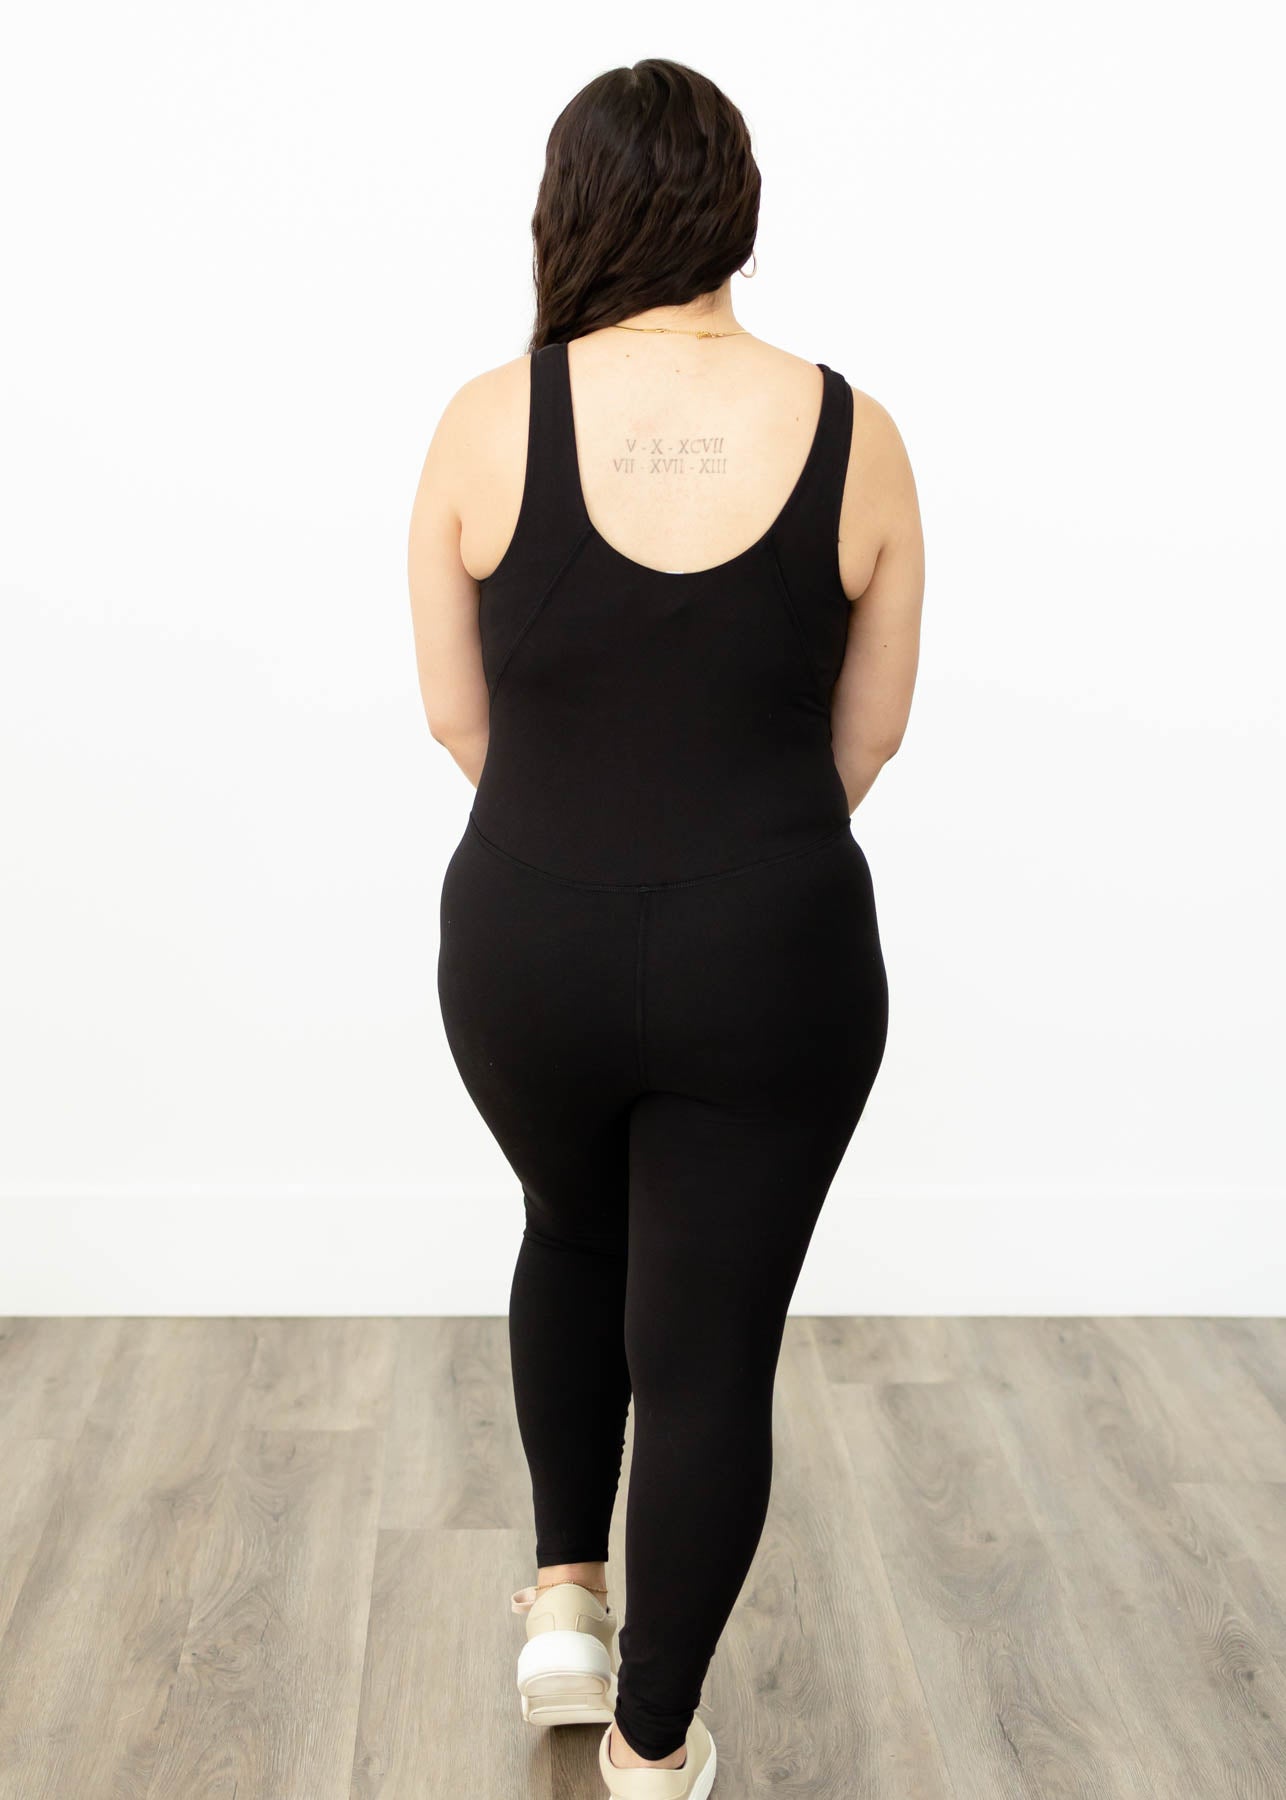 Back view of a large black bodysuit